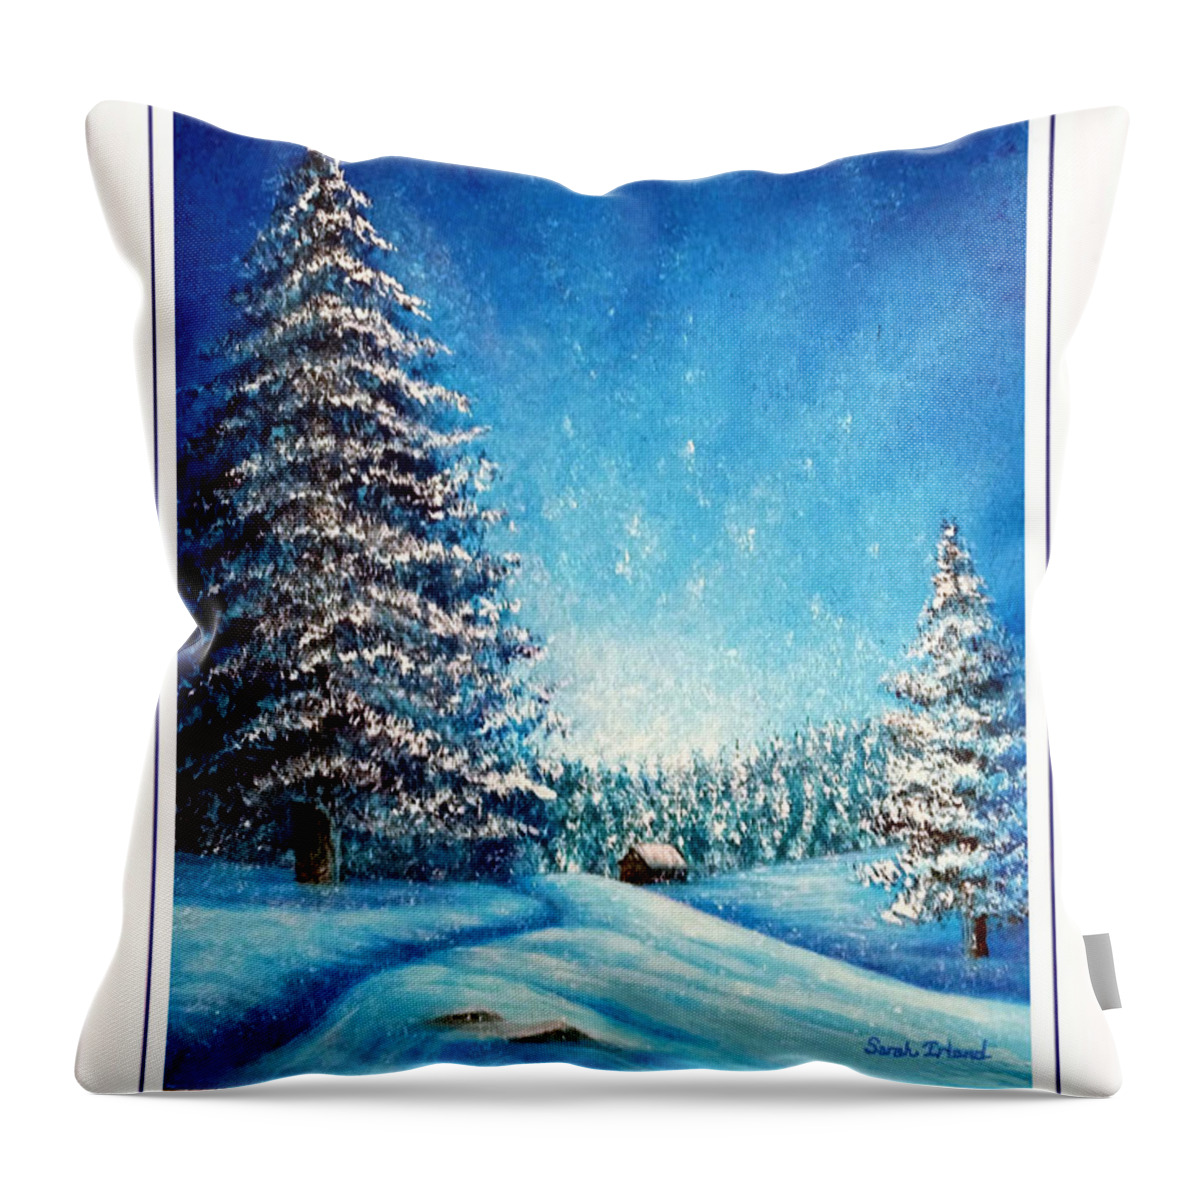 Holiday Throw Pillow featuring the painting Wintry Light - Seasons Greetings by Sarah Irland